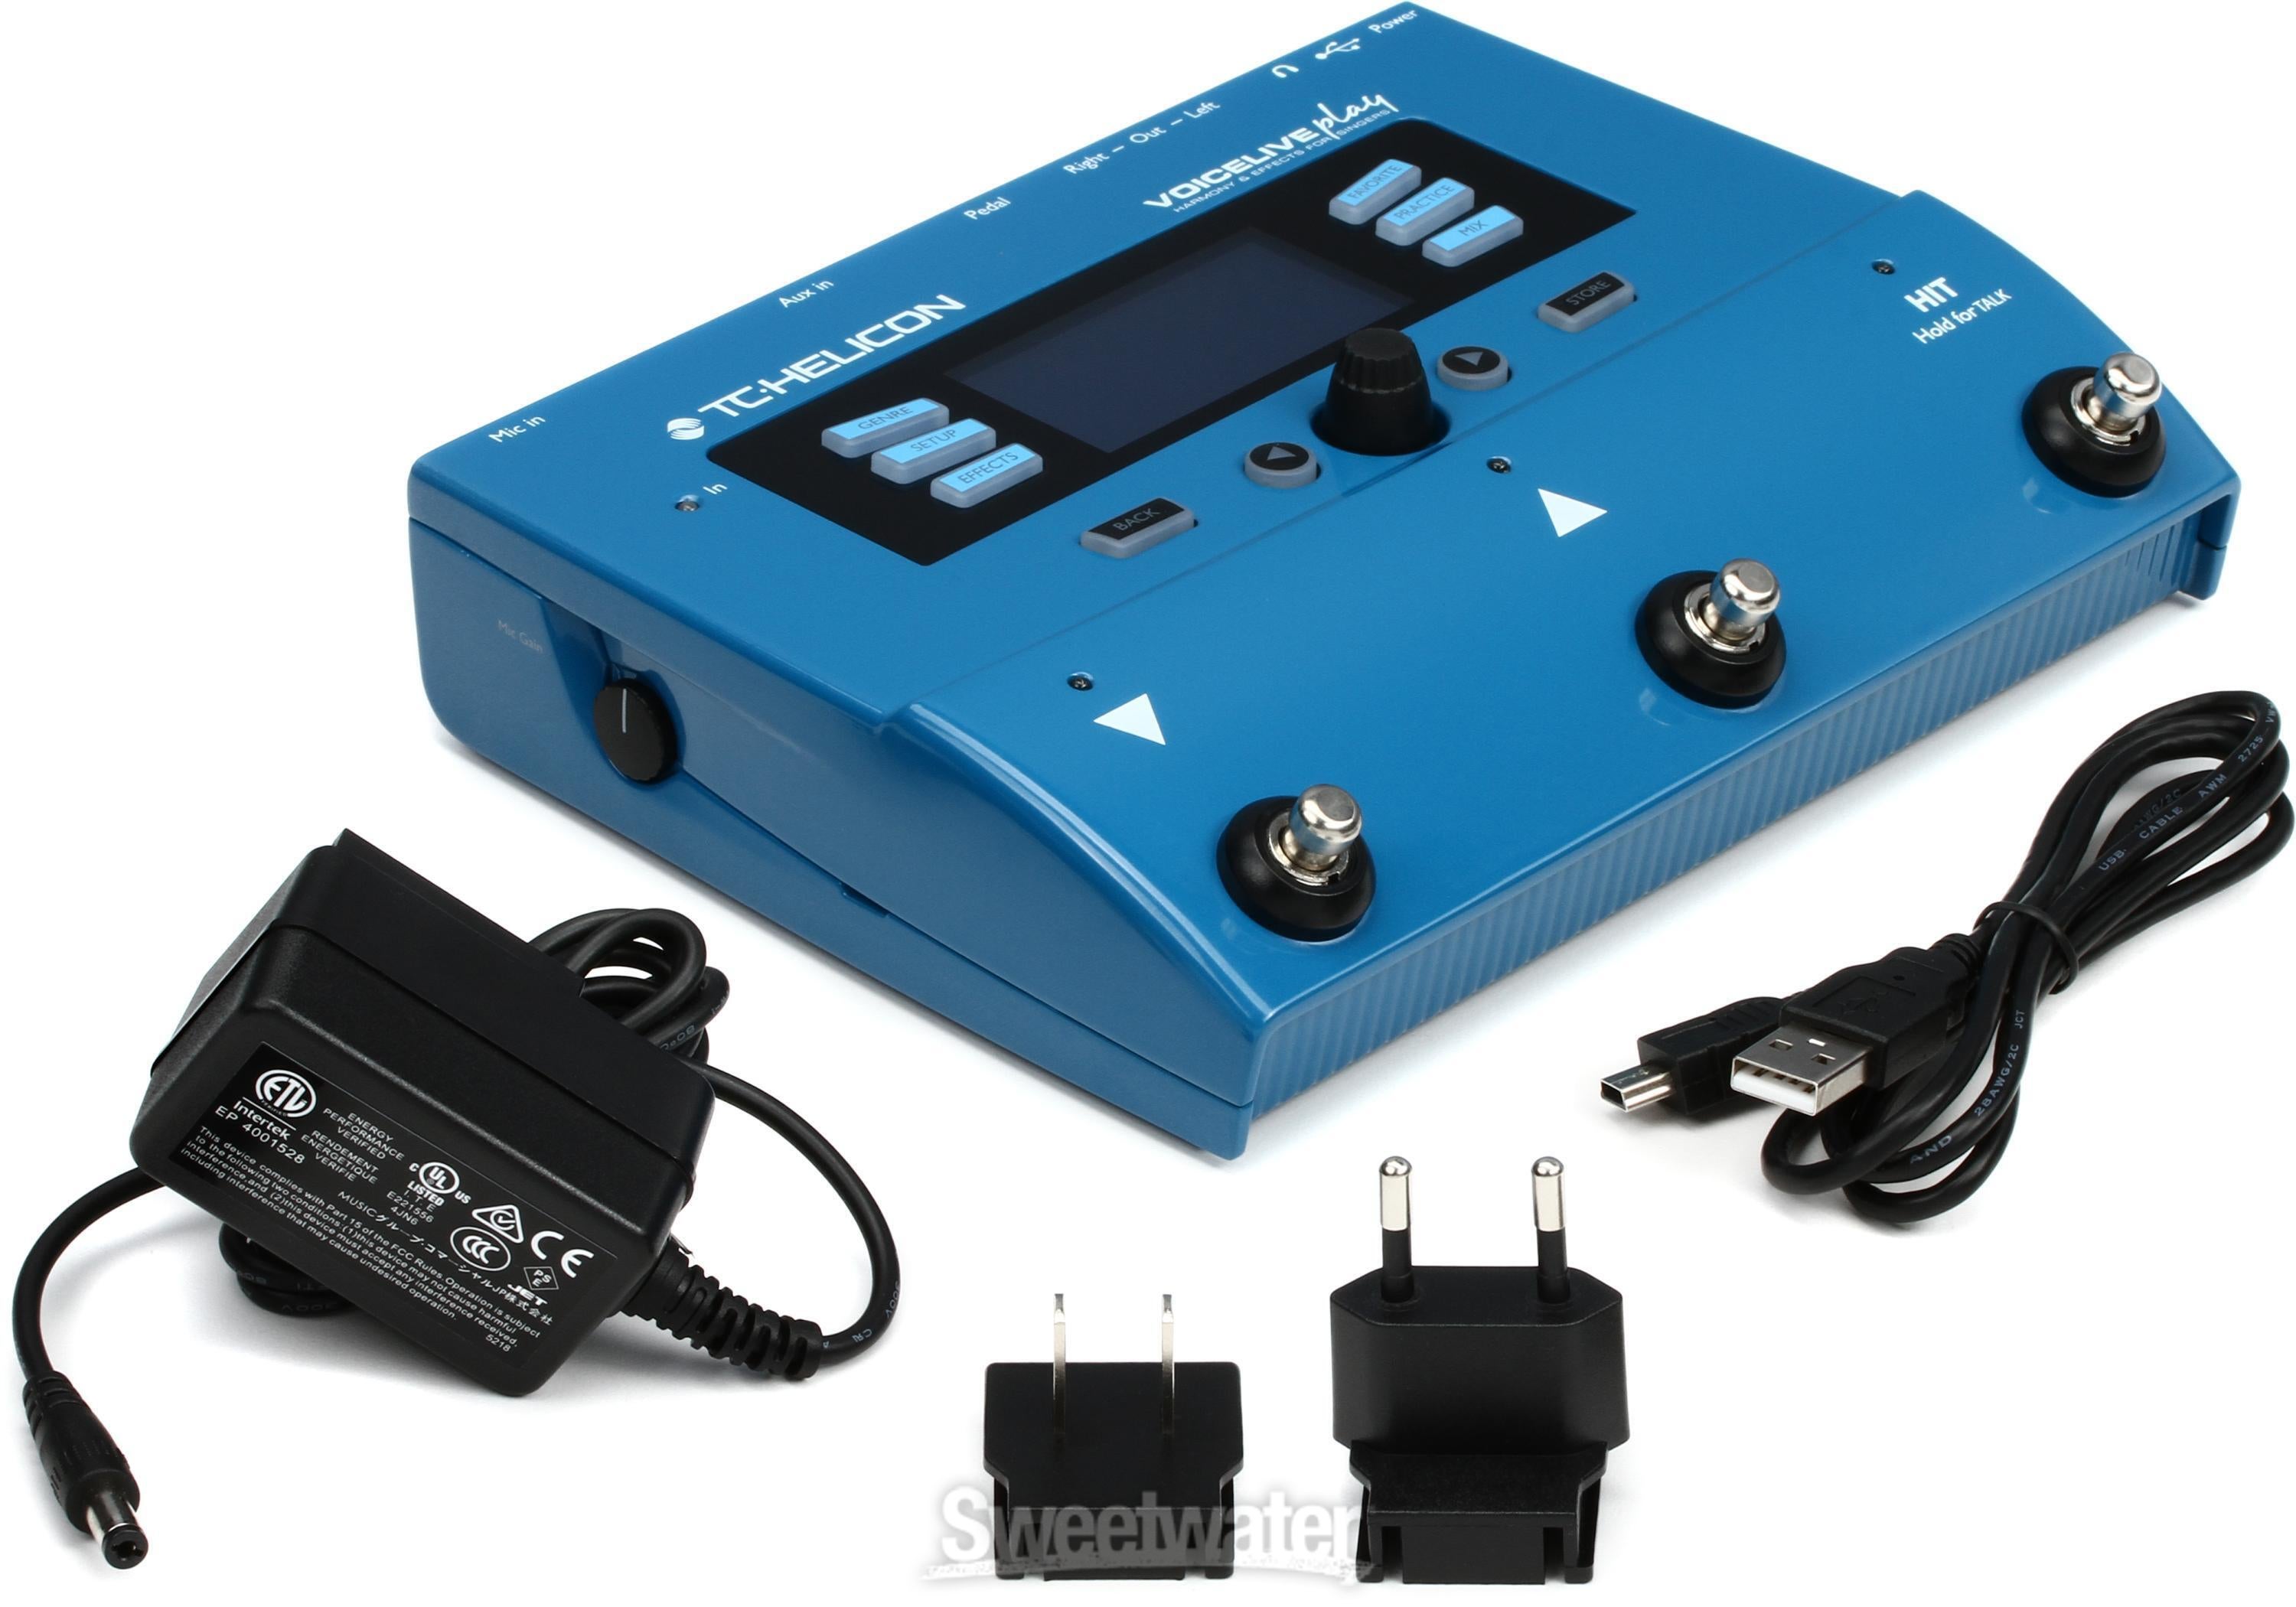 TC-Helicon VoiceLive Play Vocal Harmony and Effects Reviews